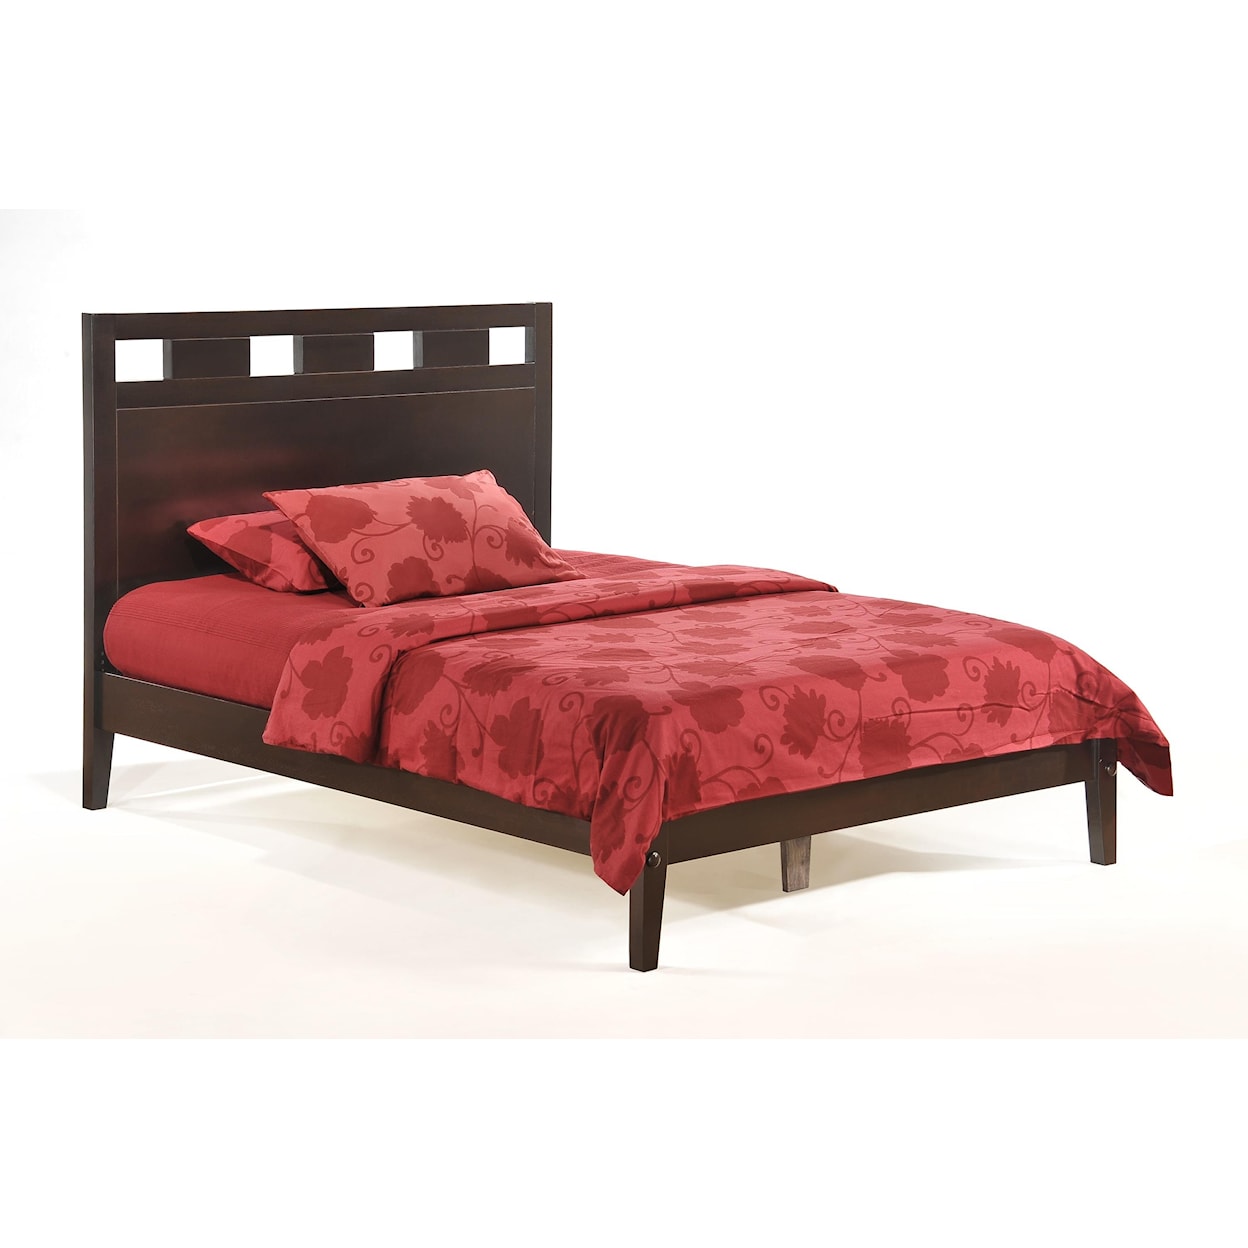 Pacific Manufacturing Tamarind Queen Bed